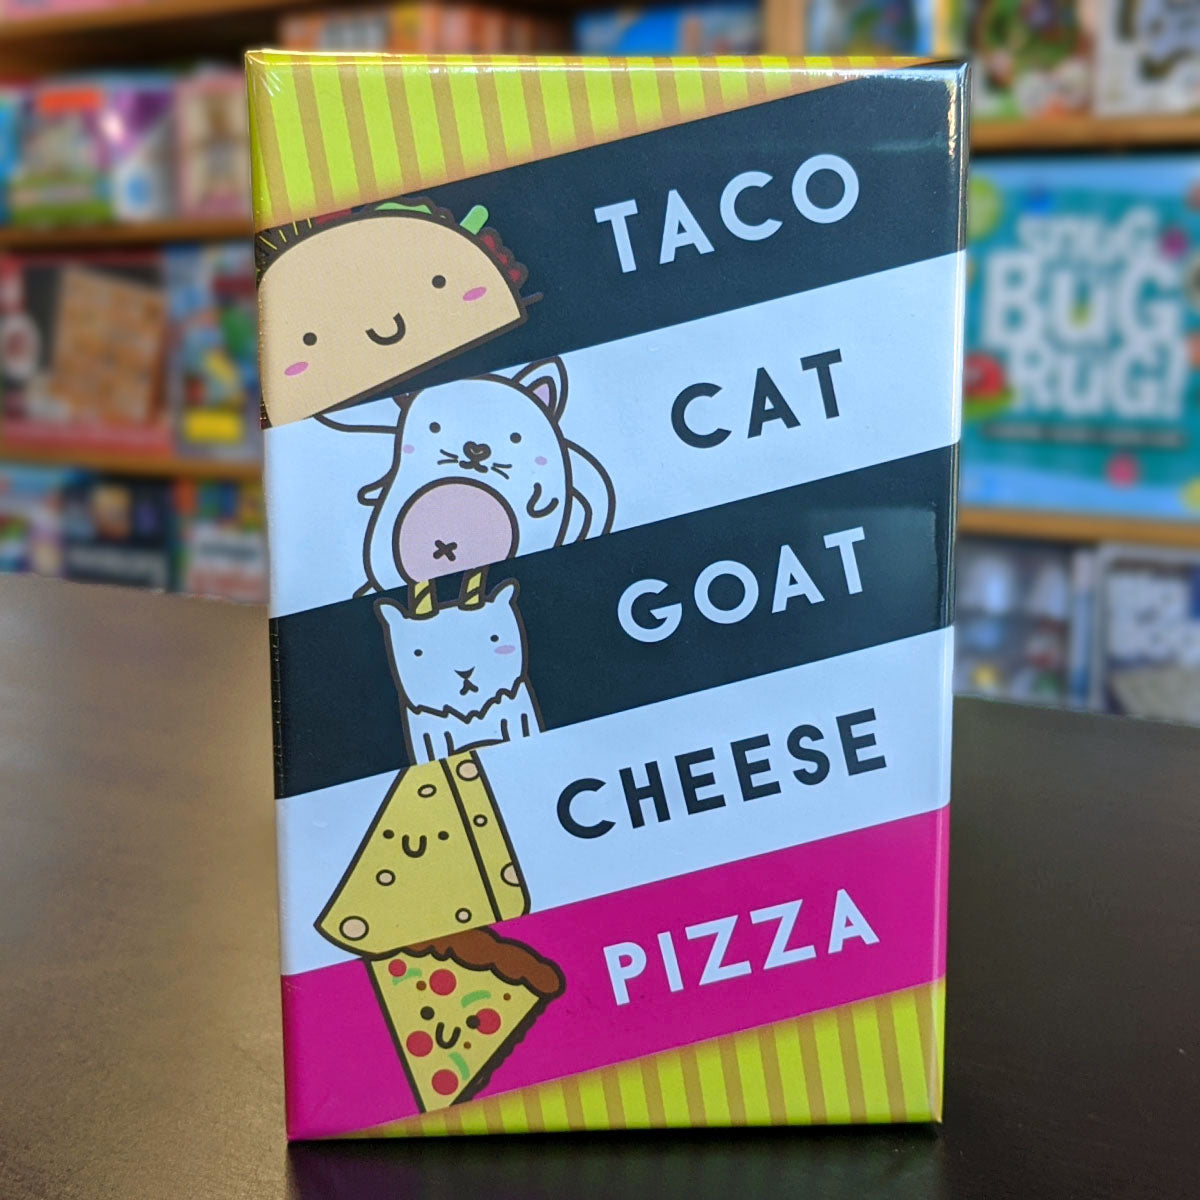 Taco cat goat cheese pizza reviews